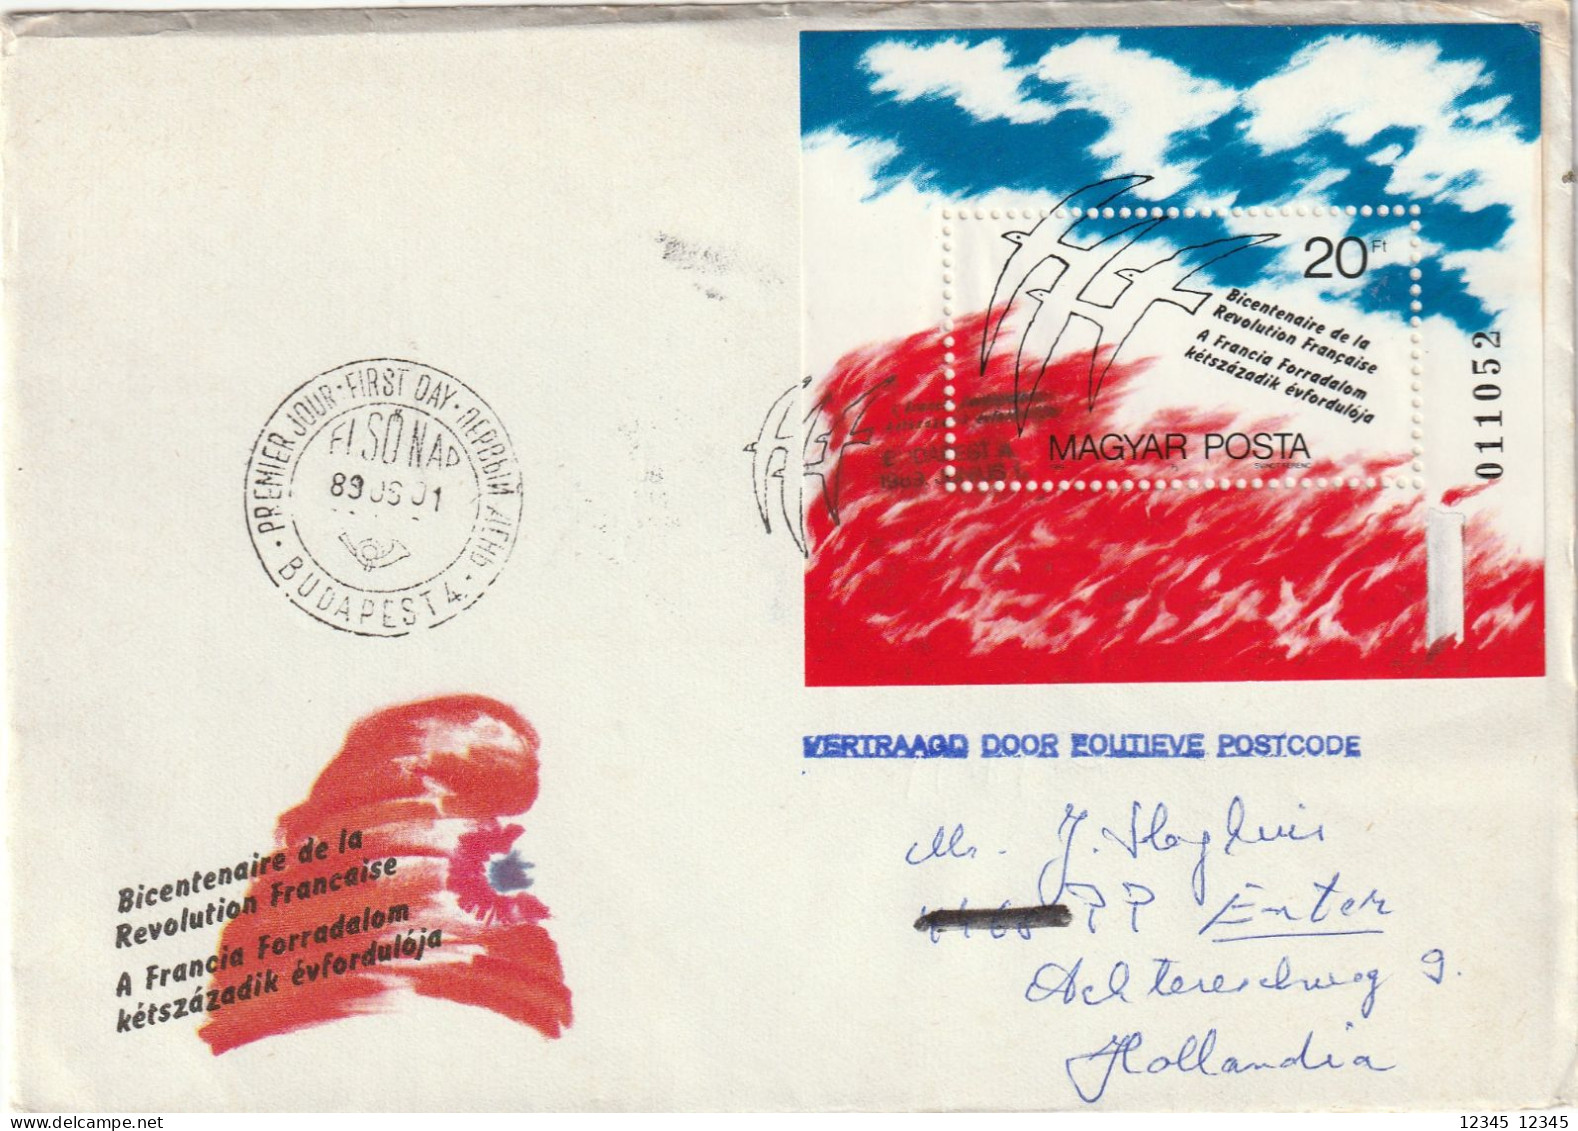 Hongarije 1989, FDC Sent To Netherland, 200th Anniversary Of The French Revolution. - FDC